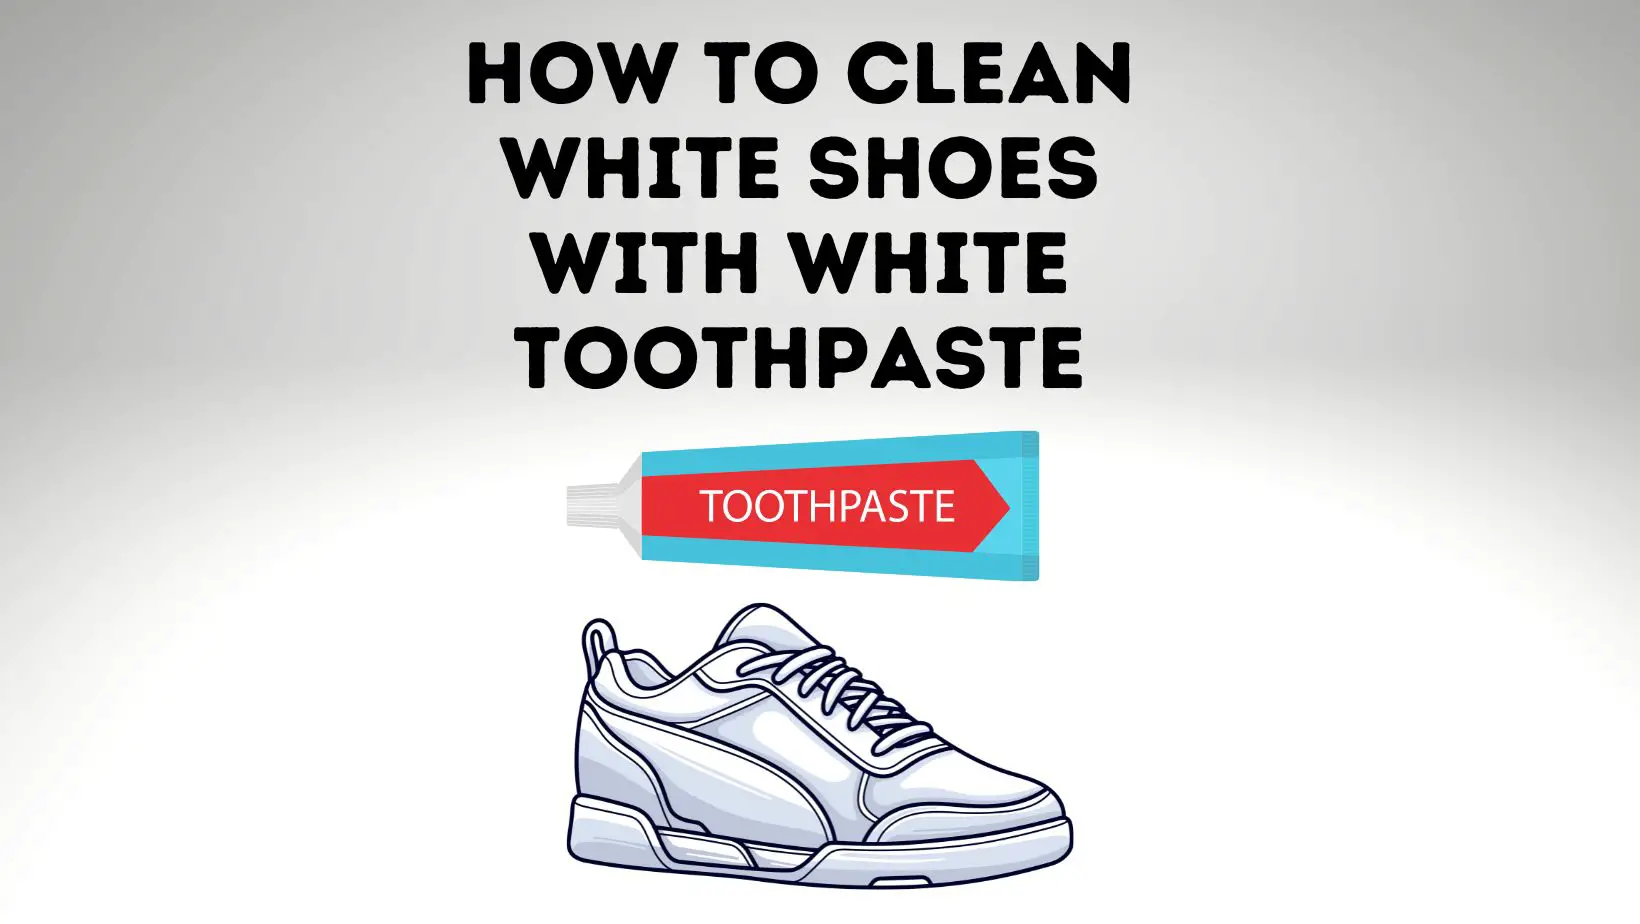 How To Clean White Shoes With White Toothpaste